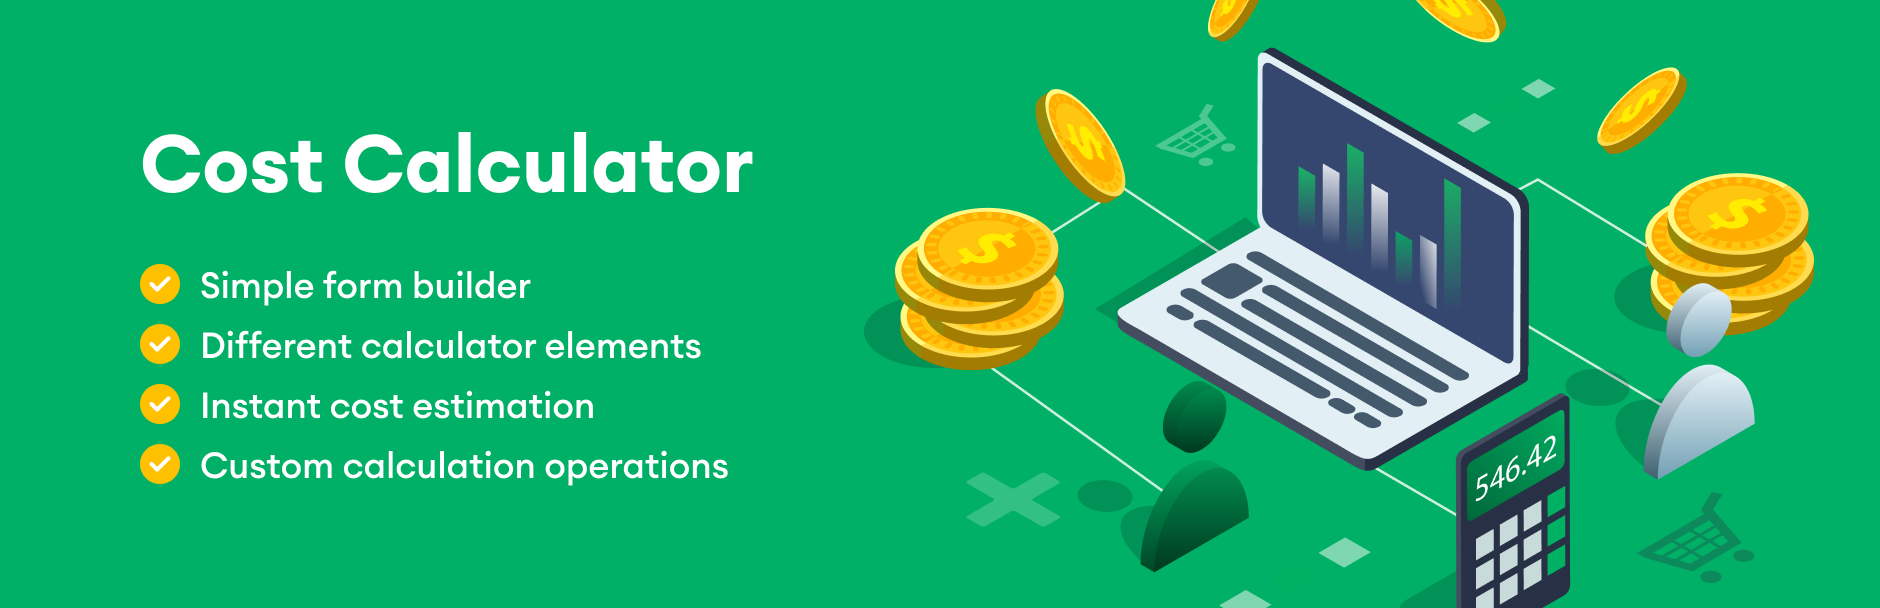 Cost Calculator Builder PRO - Cost Calculator Builder PRO v3.1.67 by Stylemixthemes Nulled Free Download